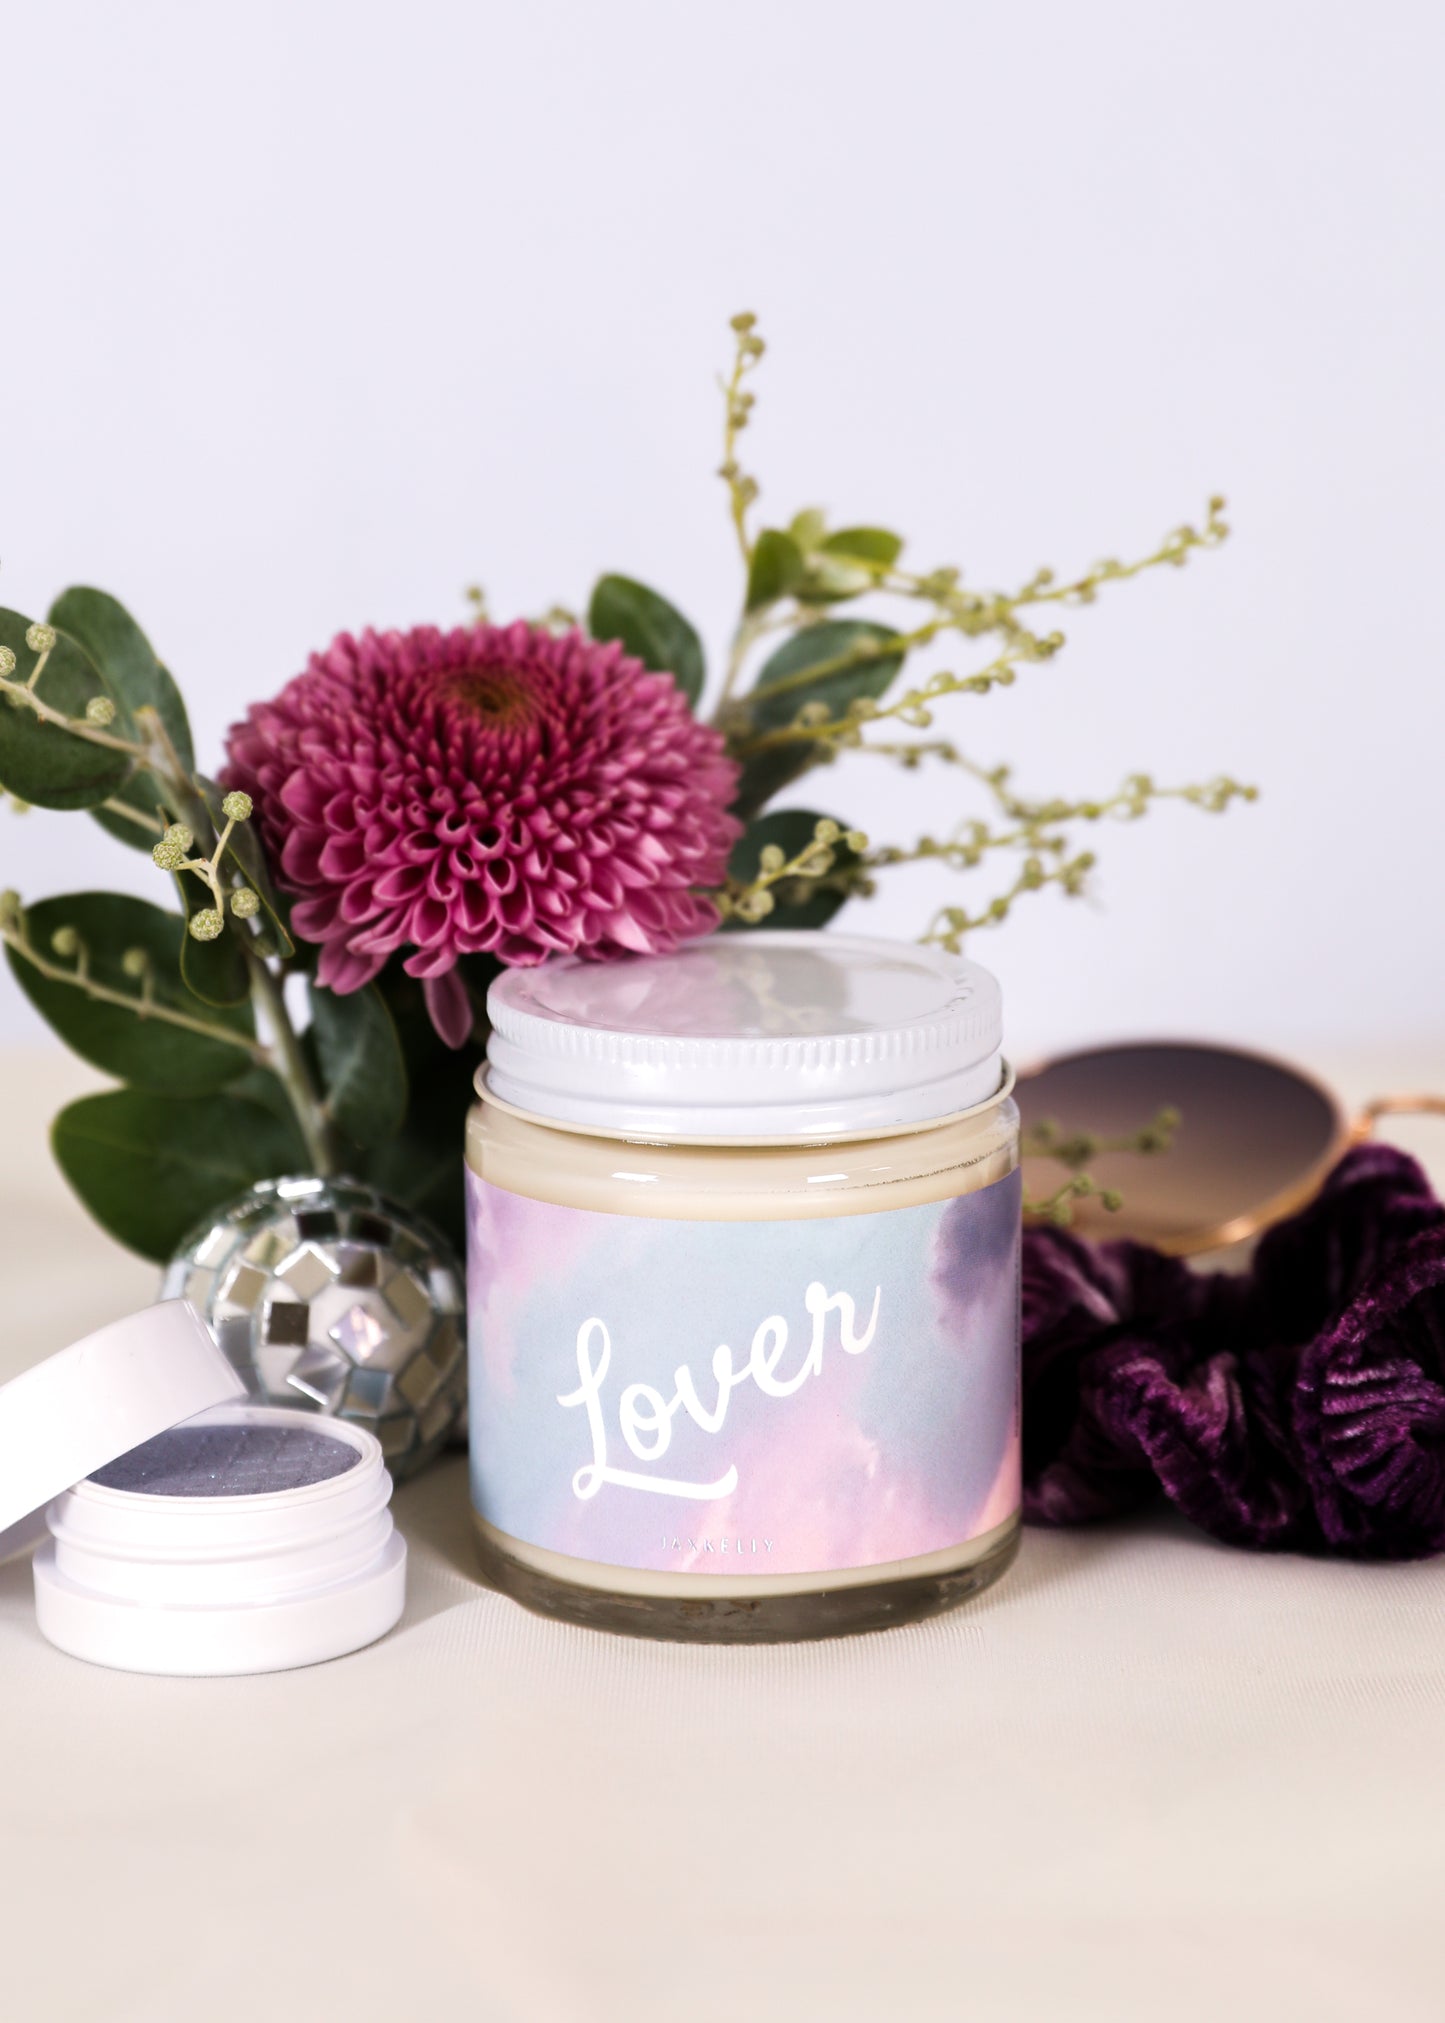 4oz - Lover Candle - Taylor Swift Inspired